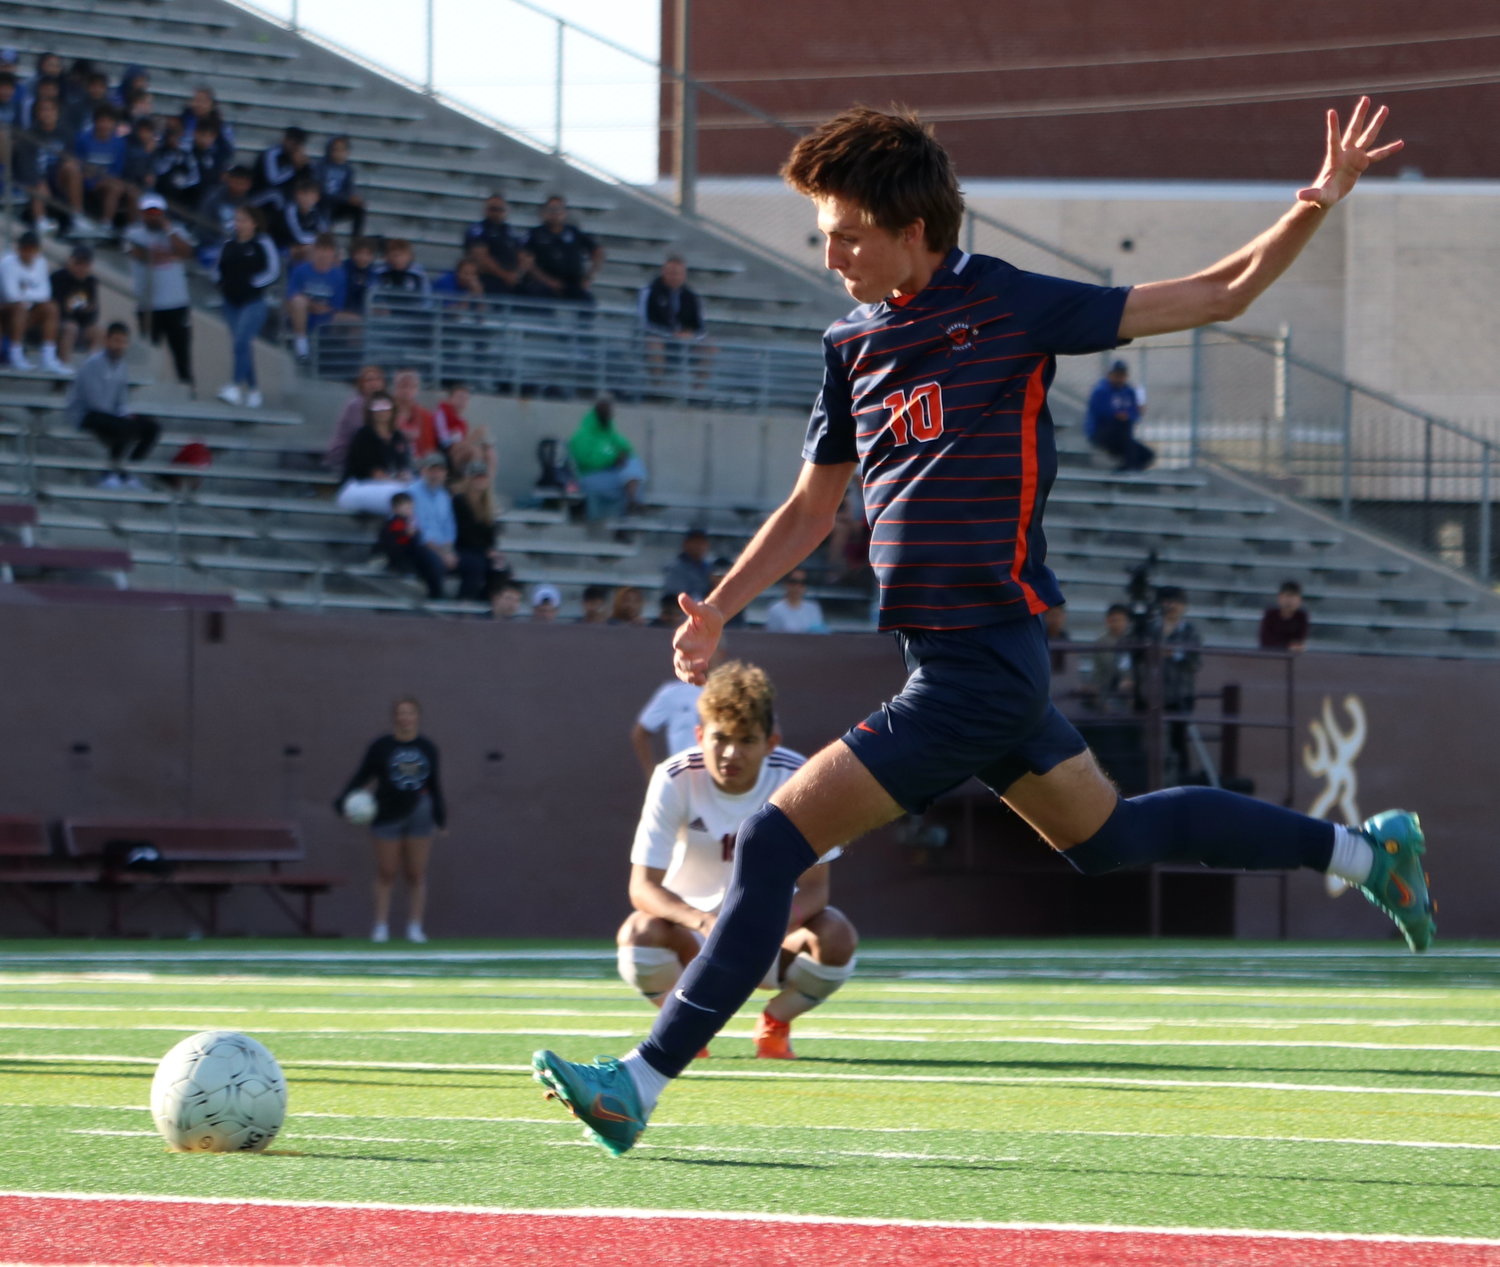 Aidan Morrison shoots a penalty kick during Friday’s Class 6A Region III Final between Seven Lakes and Deer Park at Abshire Stadium in Deer Park.